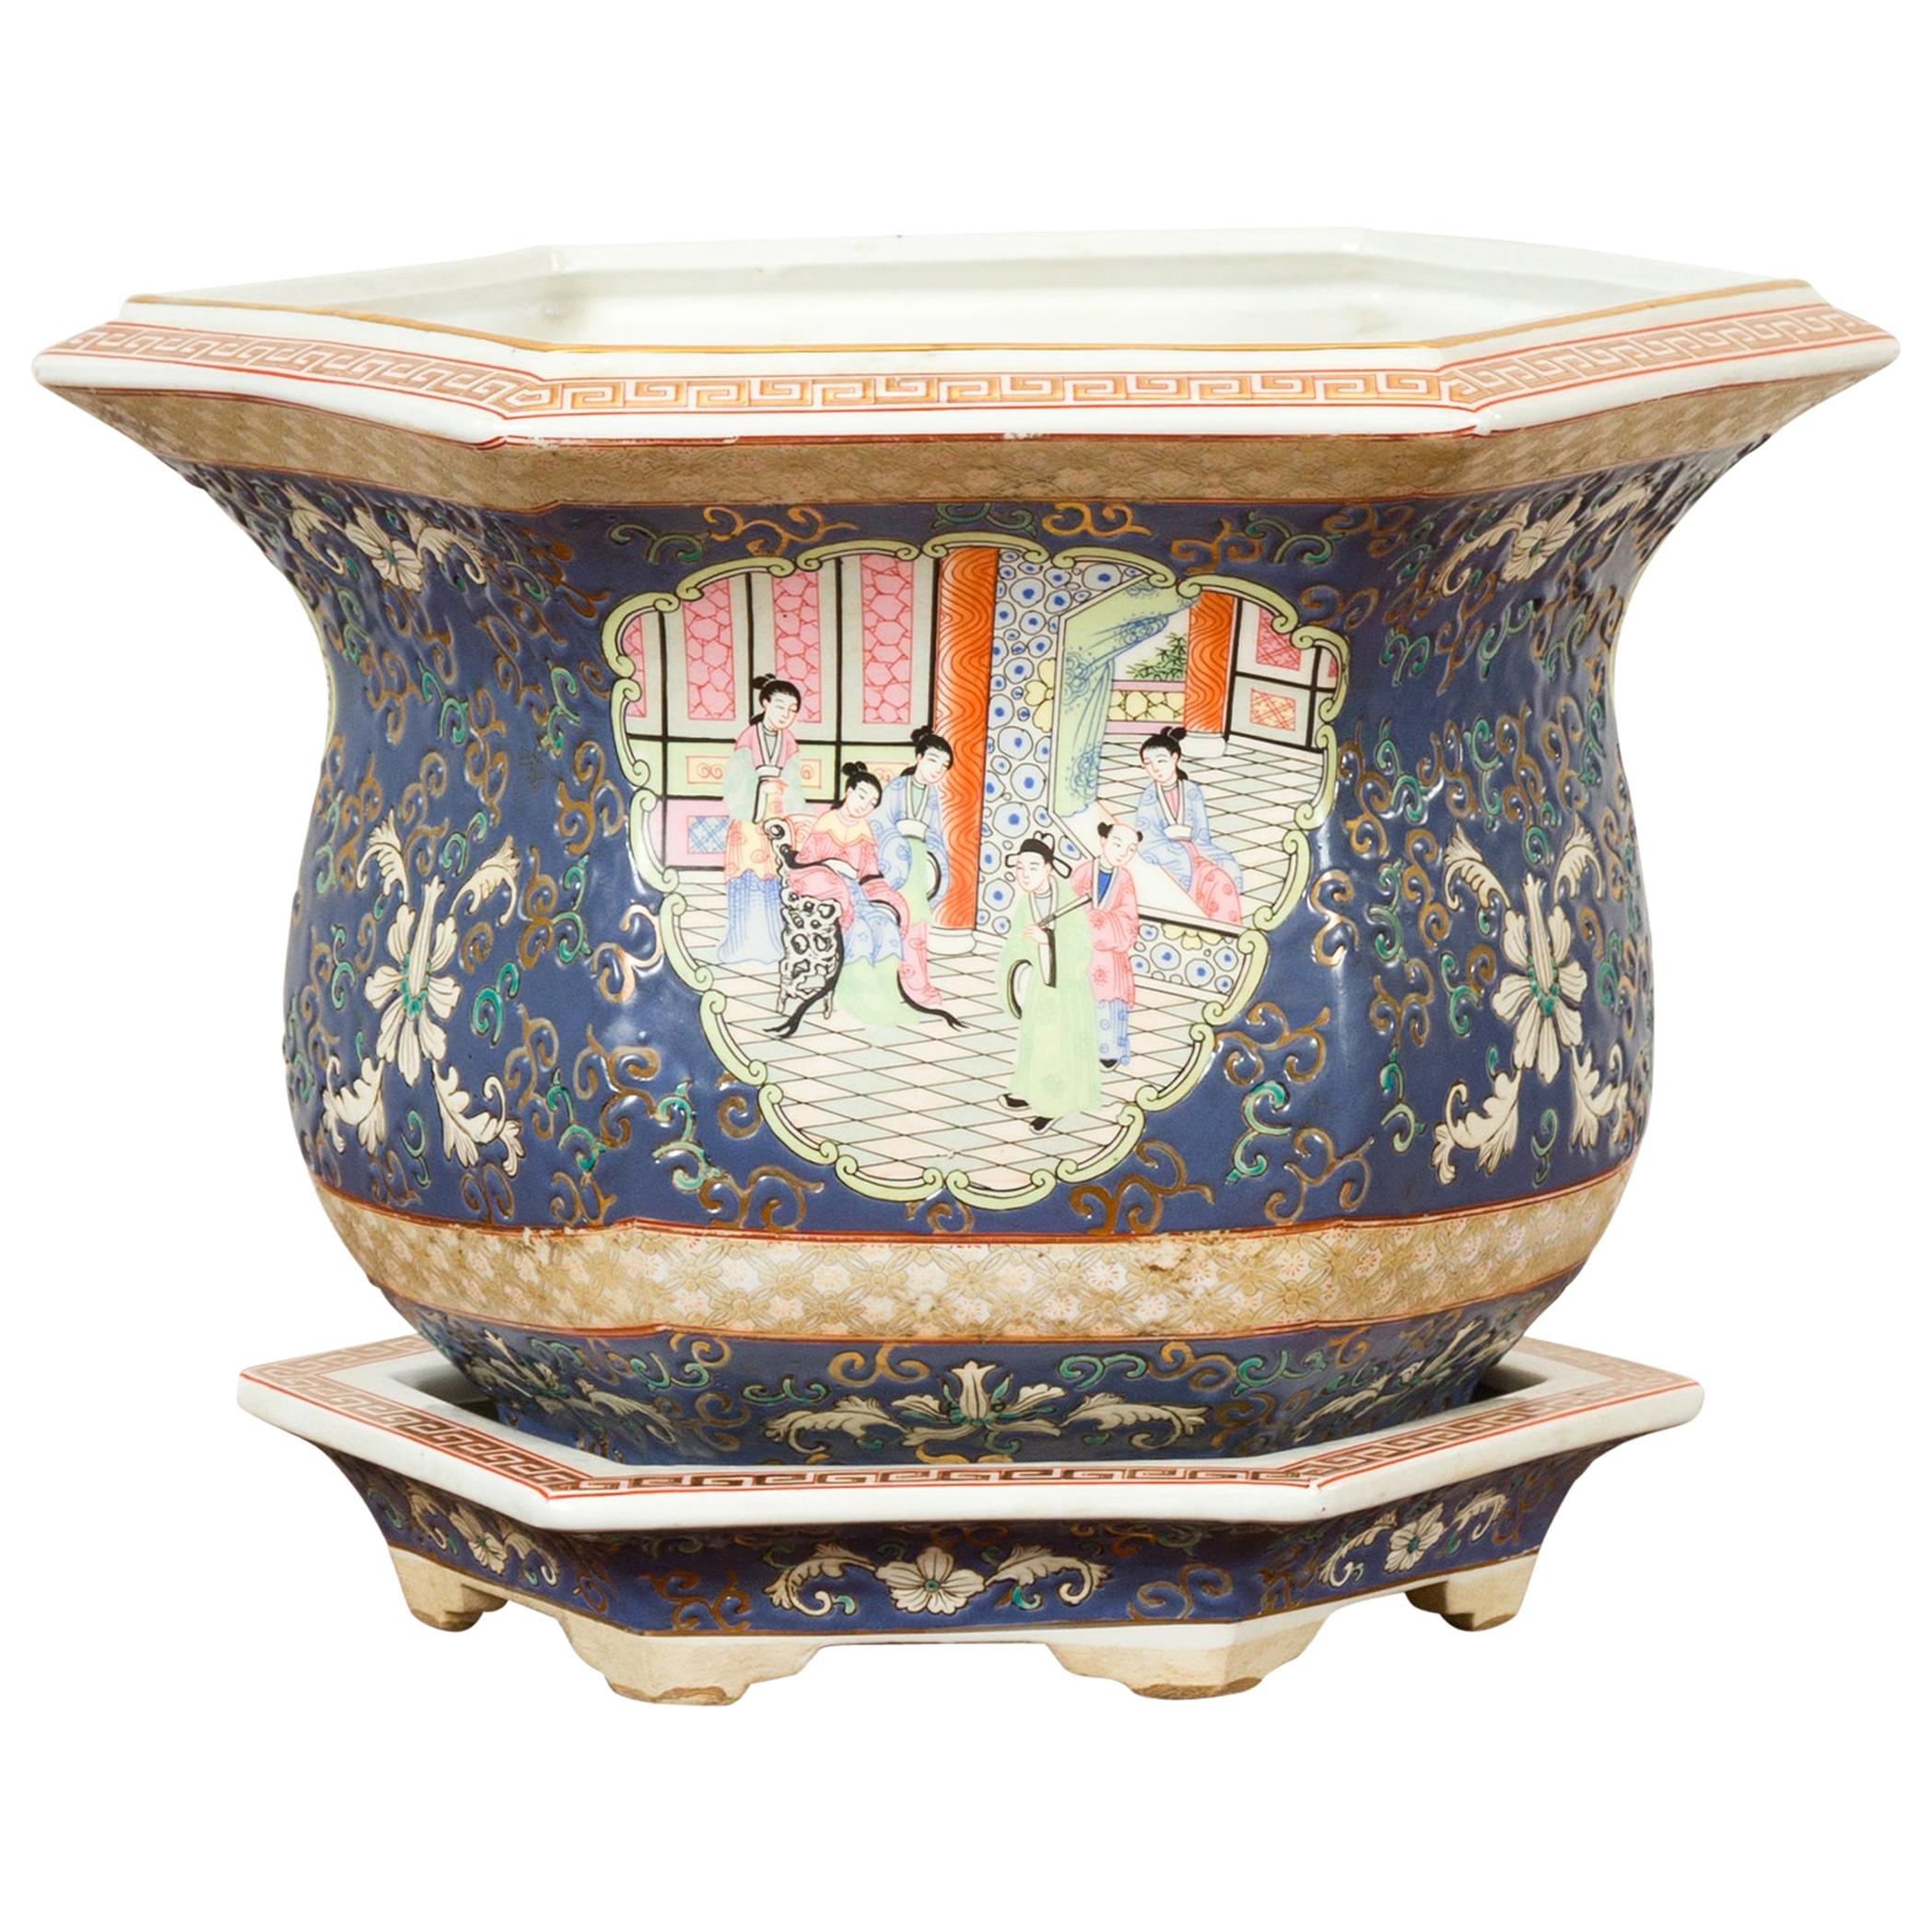 Chinese Hexagonal Planter with Hand Painted Courtyard Scenes Depicting Maidens